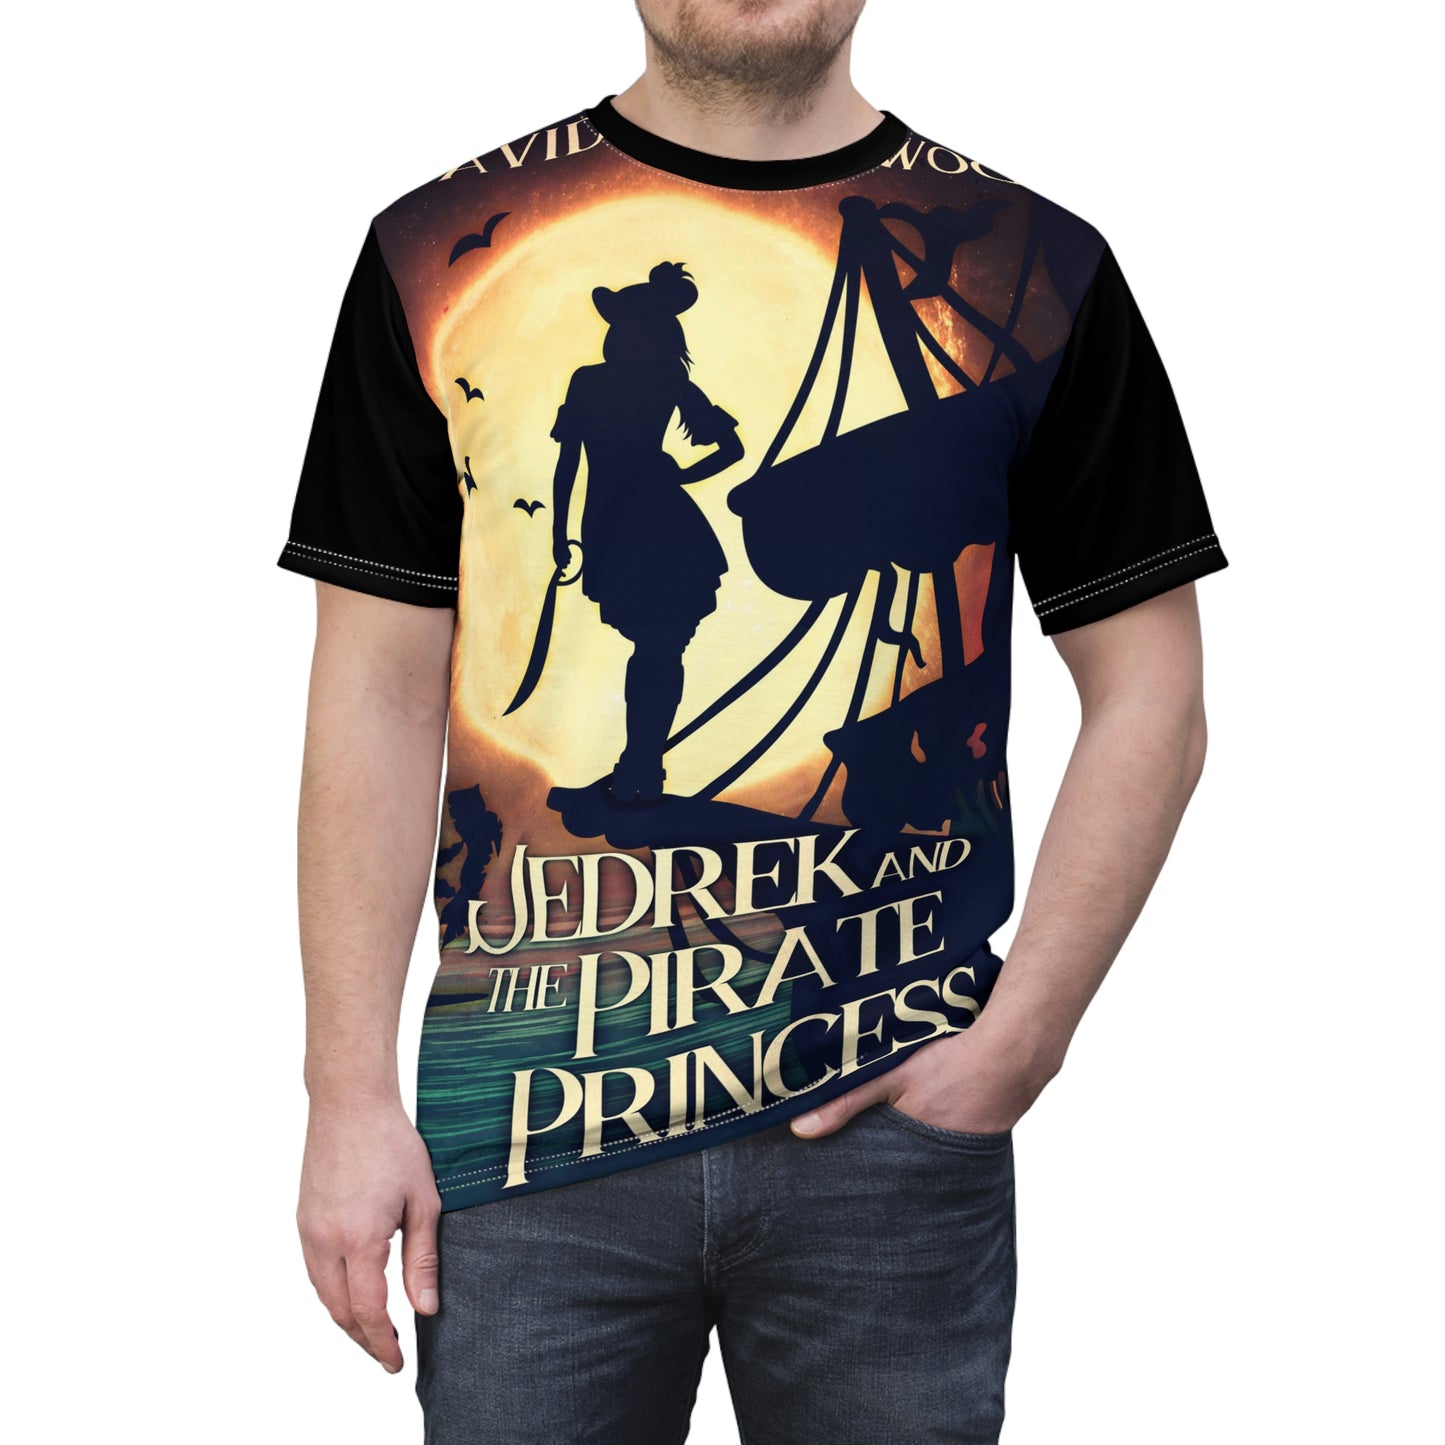 Jedrek And The Pirate Princess - Unisex All-Over Print Cut & Sew T-Shirt